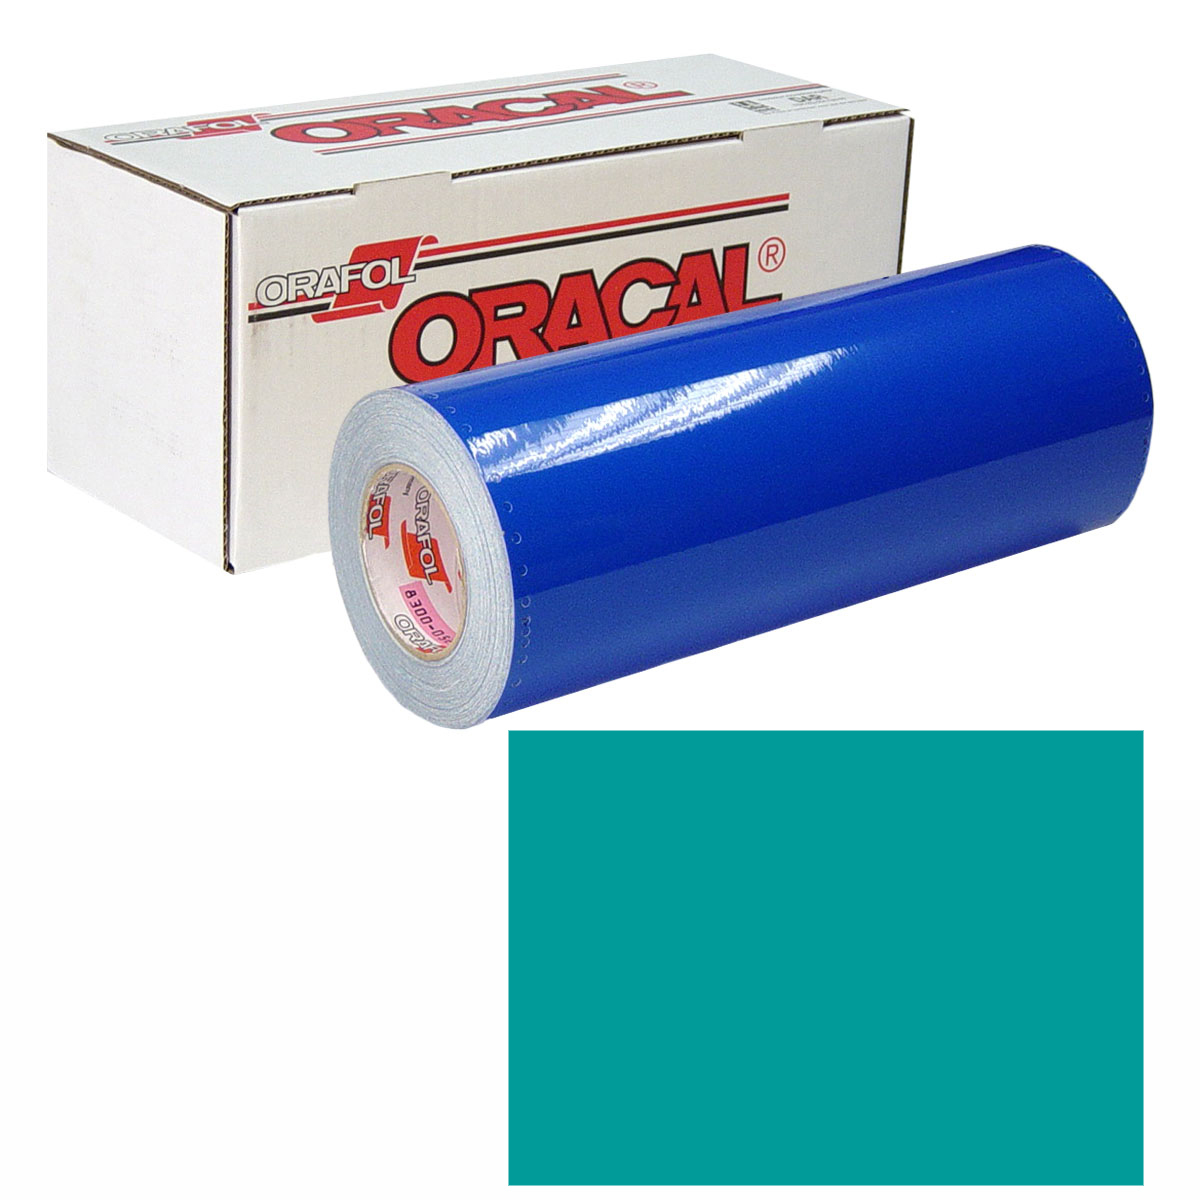 ORACAL 631 Unp 48in X 10yd 054 Turquoise